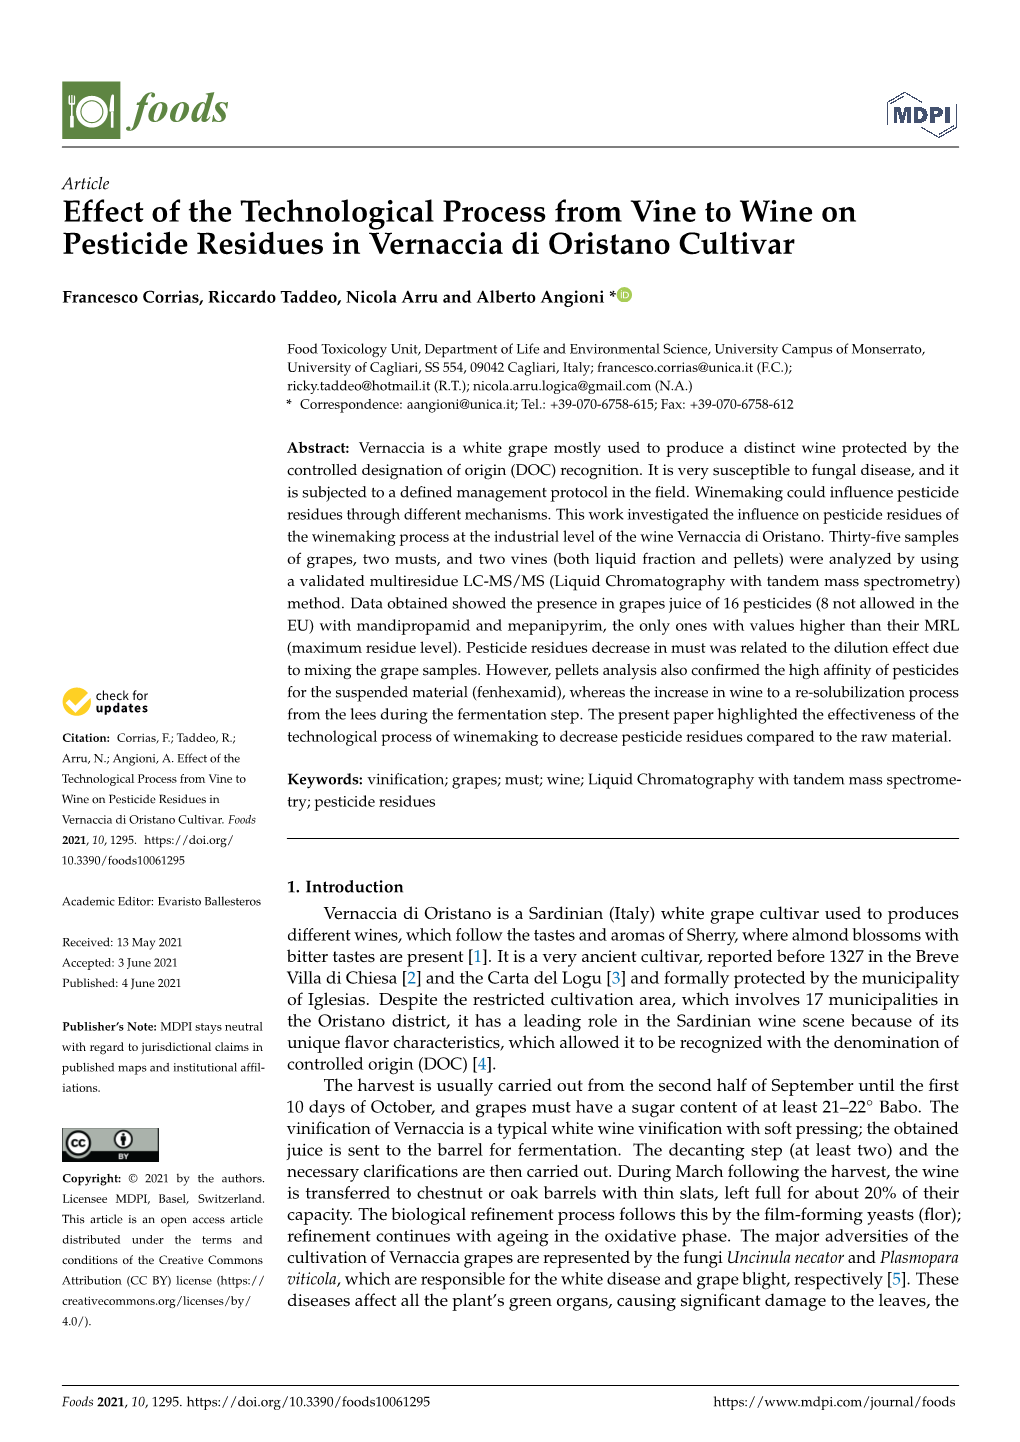 Effect of the Technological Process from Vine to Wine on Pesticide Residues in Vernaccia Di Oristano Cultivar